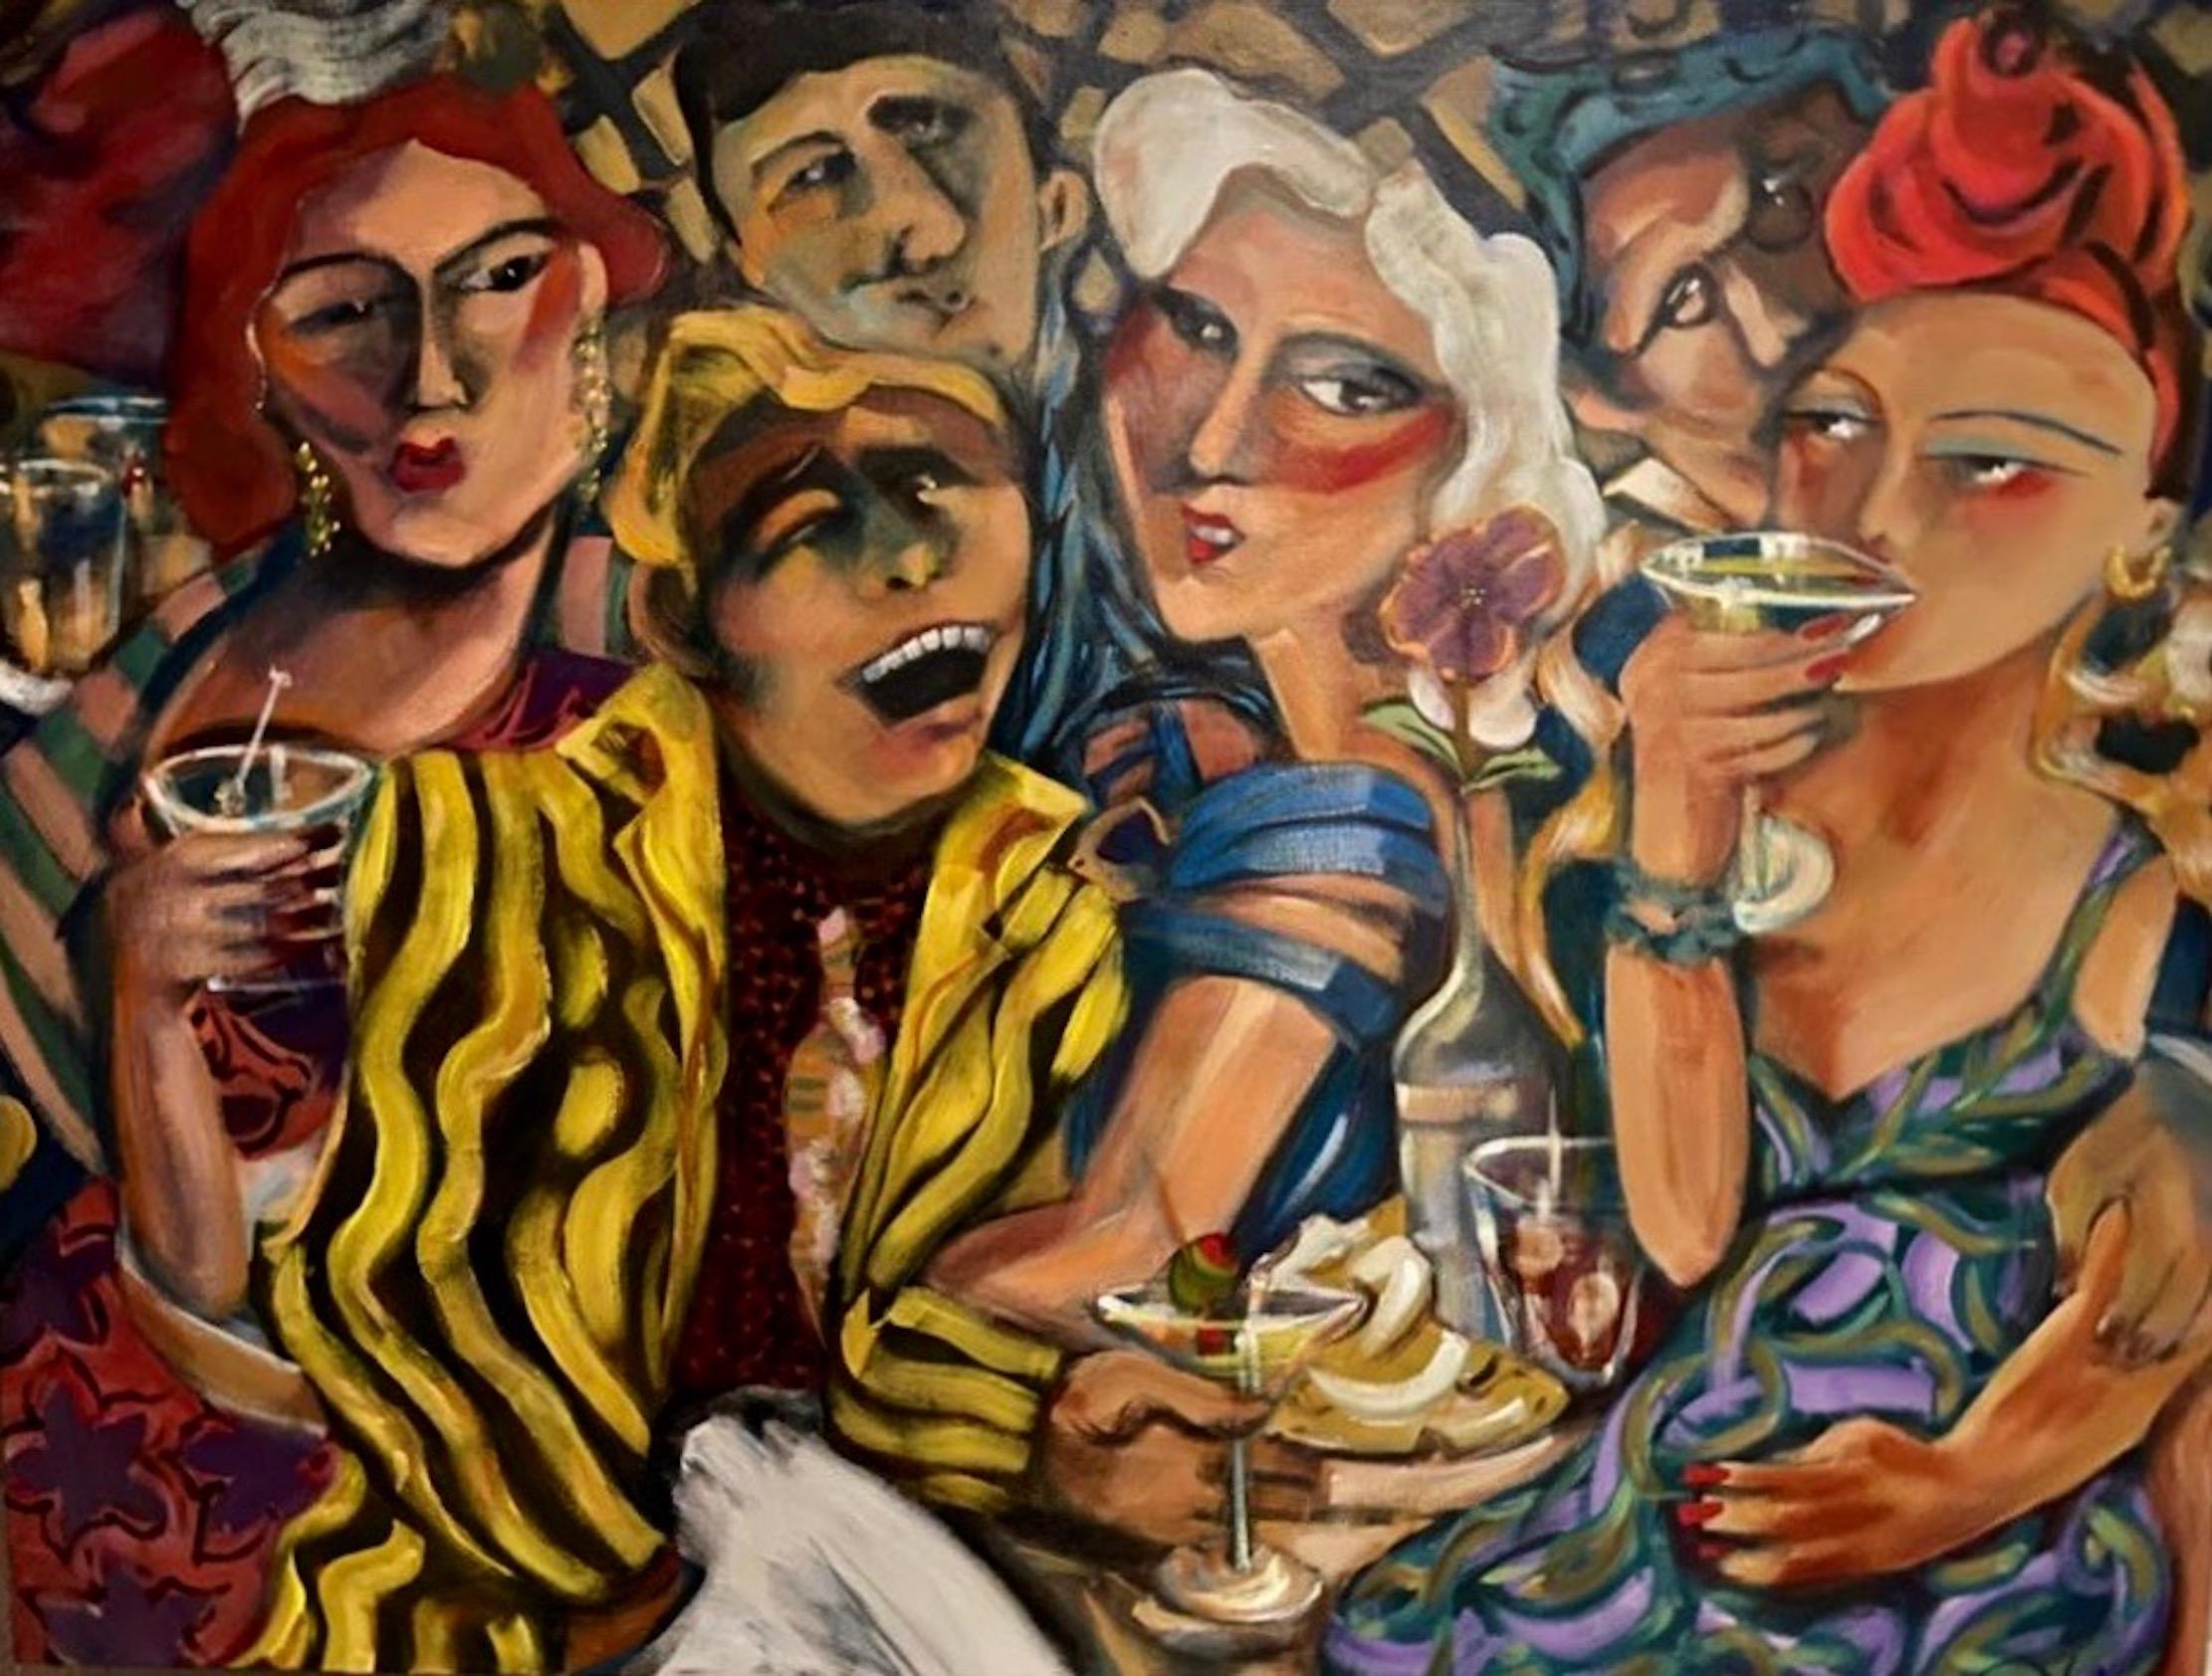 Sandra Jones Campbell Figurative Painting - "Cocktails With Scam Likely" Contemporary Expressionist Figure acrylic painting 